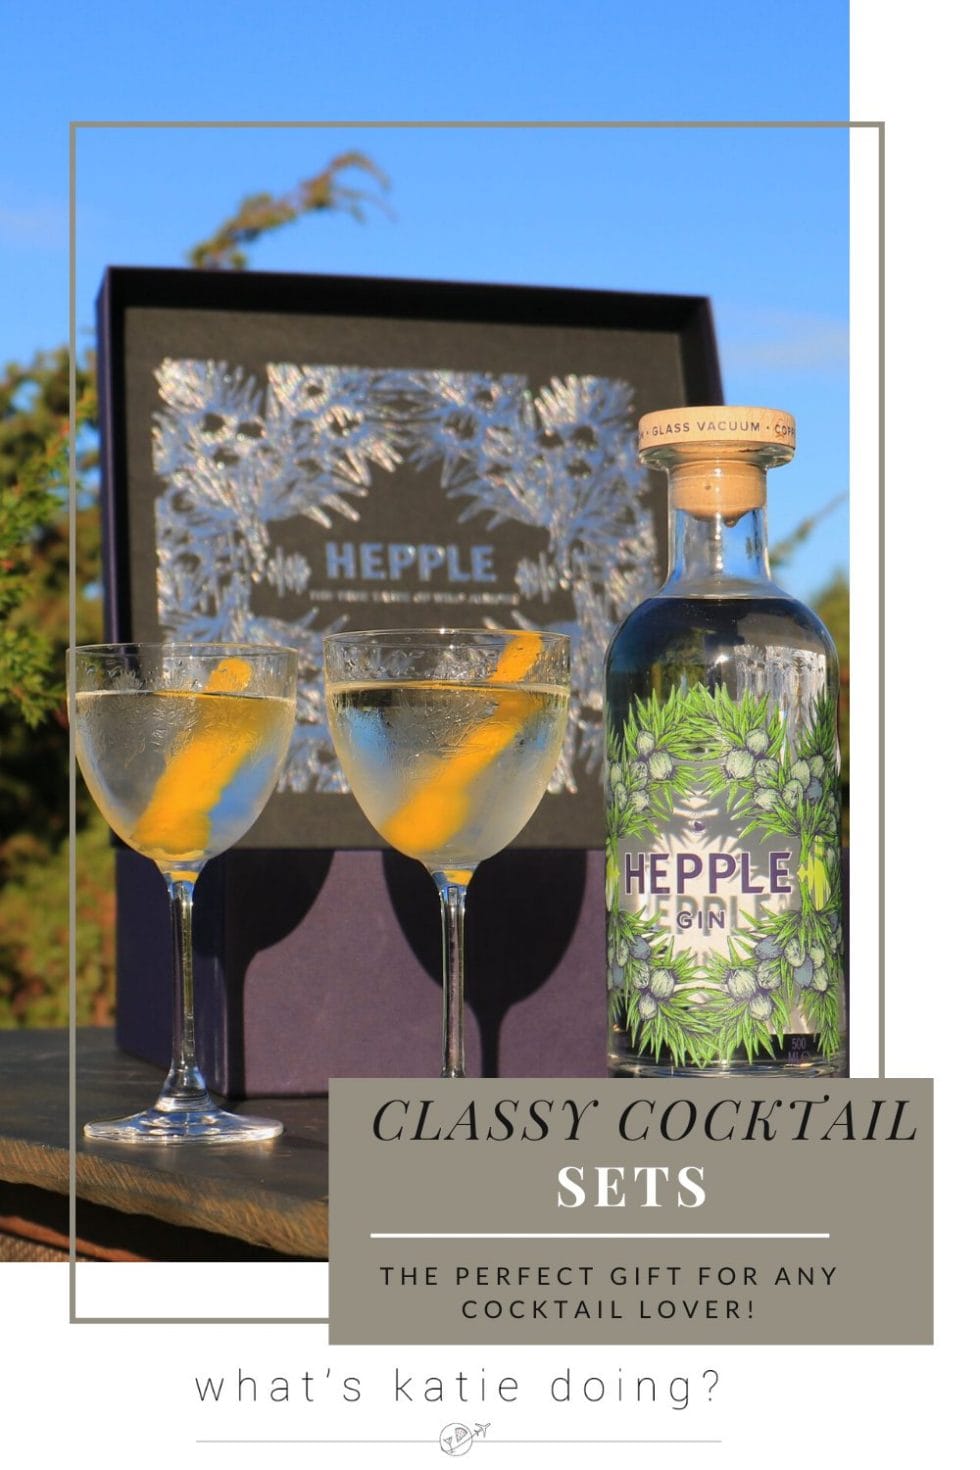 Classy Cocktail Sets - Hepple gift box